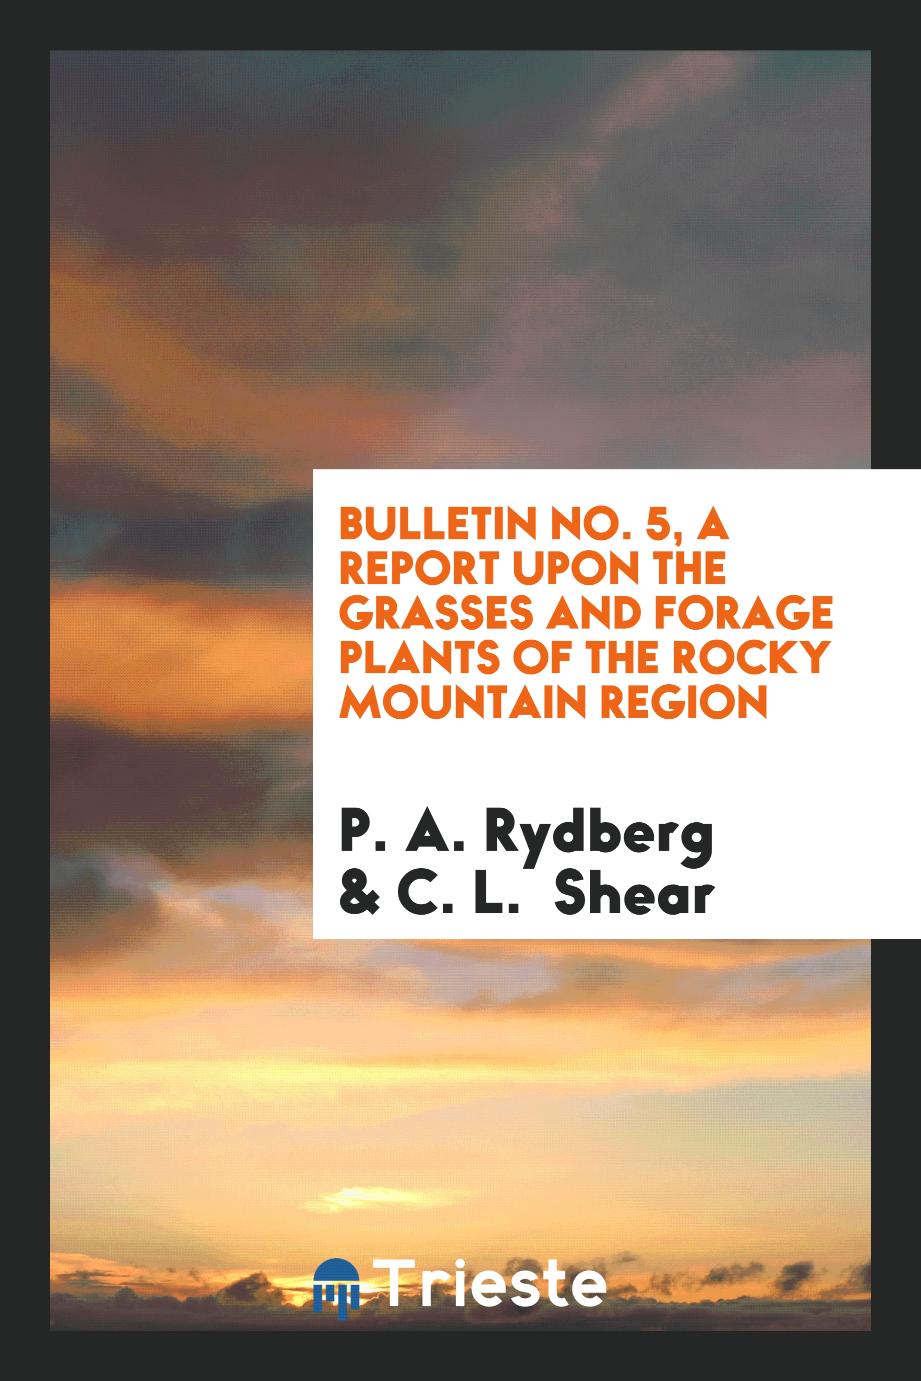 Bulletin No. 5, A report upon the Grasses and forage plants of the rocky mountain region